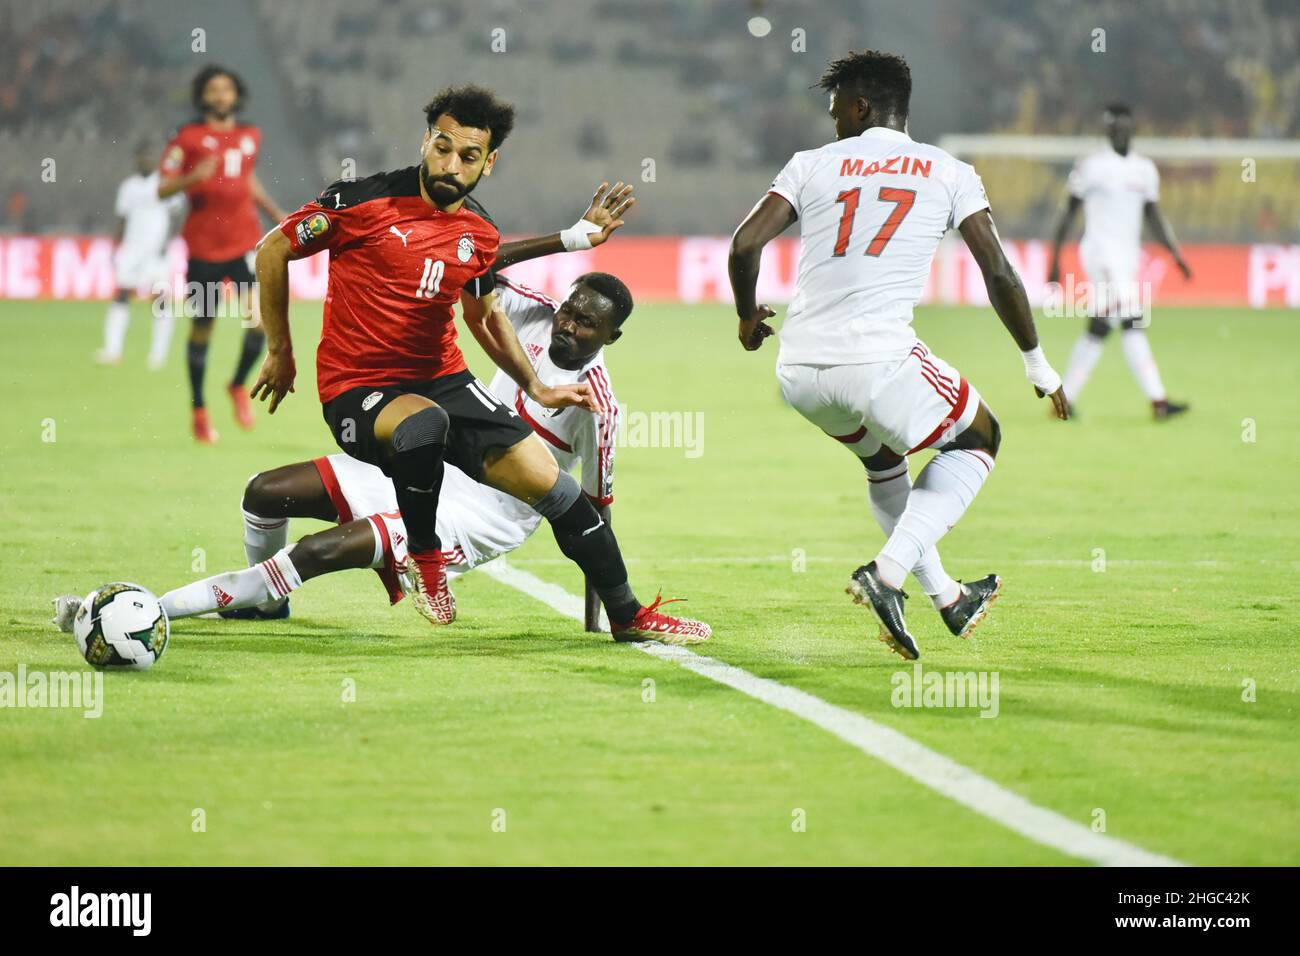 Mohamed Salah Egypt High Resolution Stock Photography and Images - Alamy